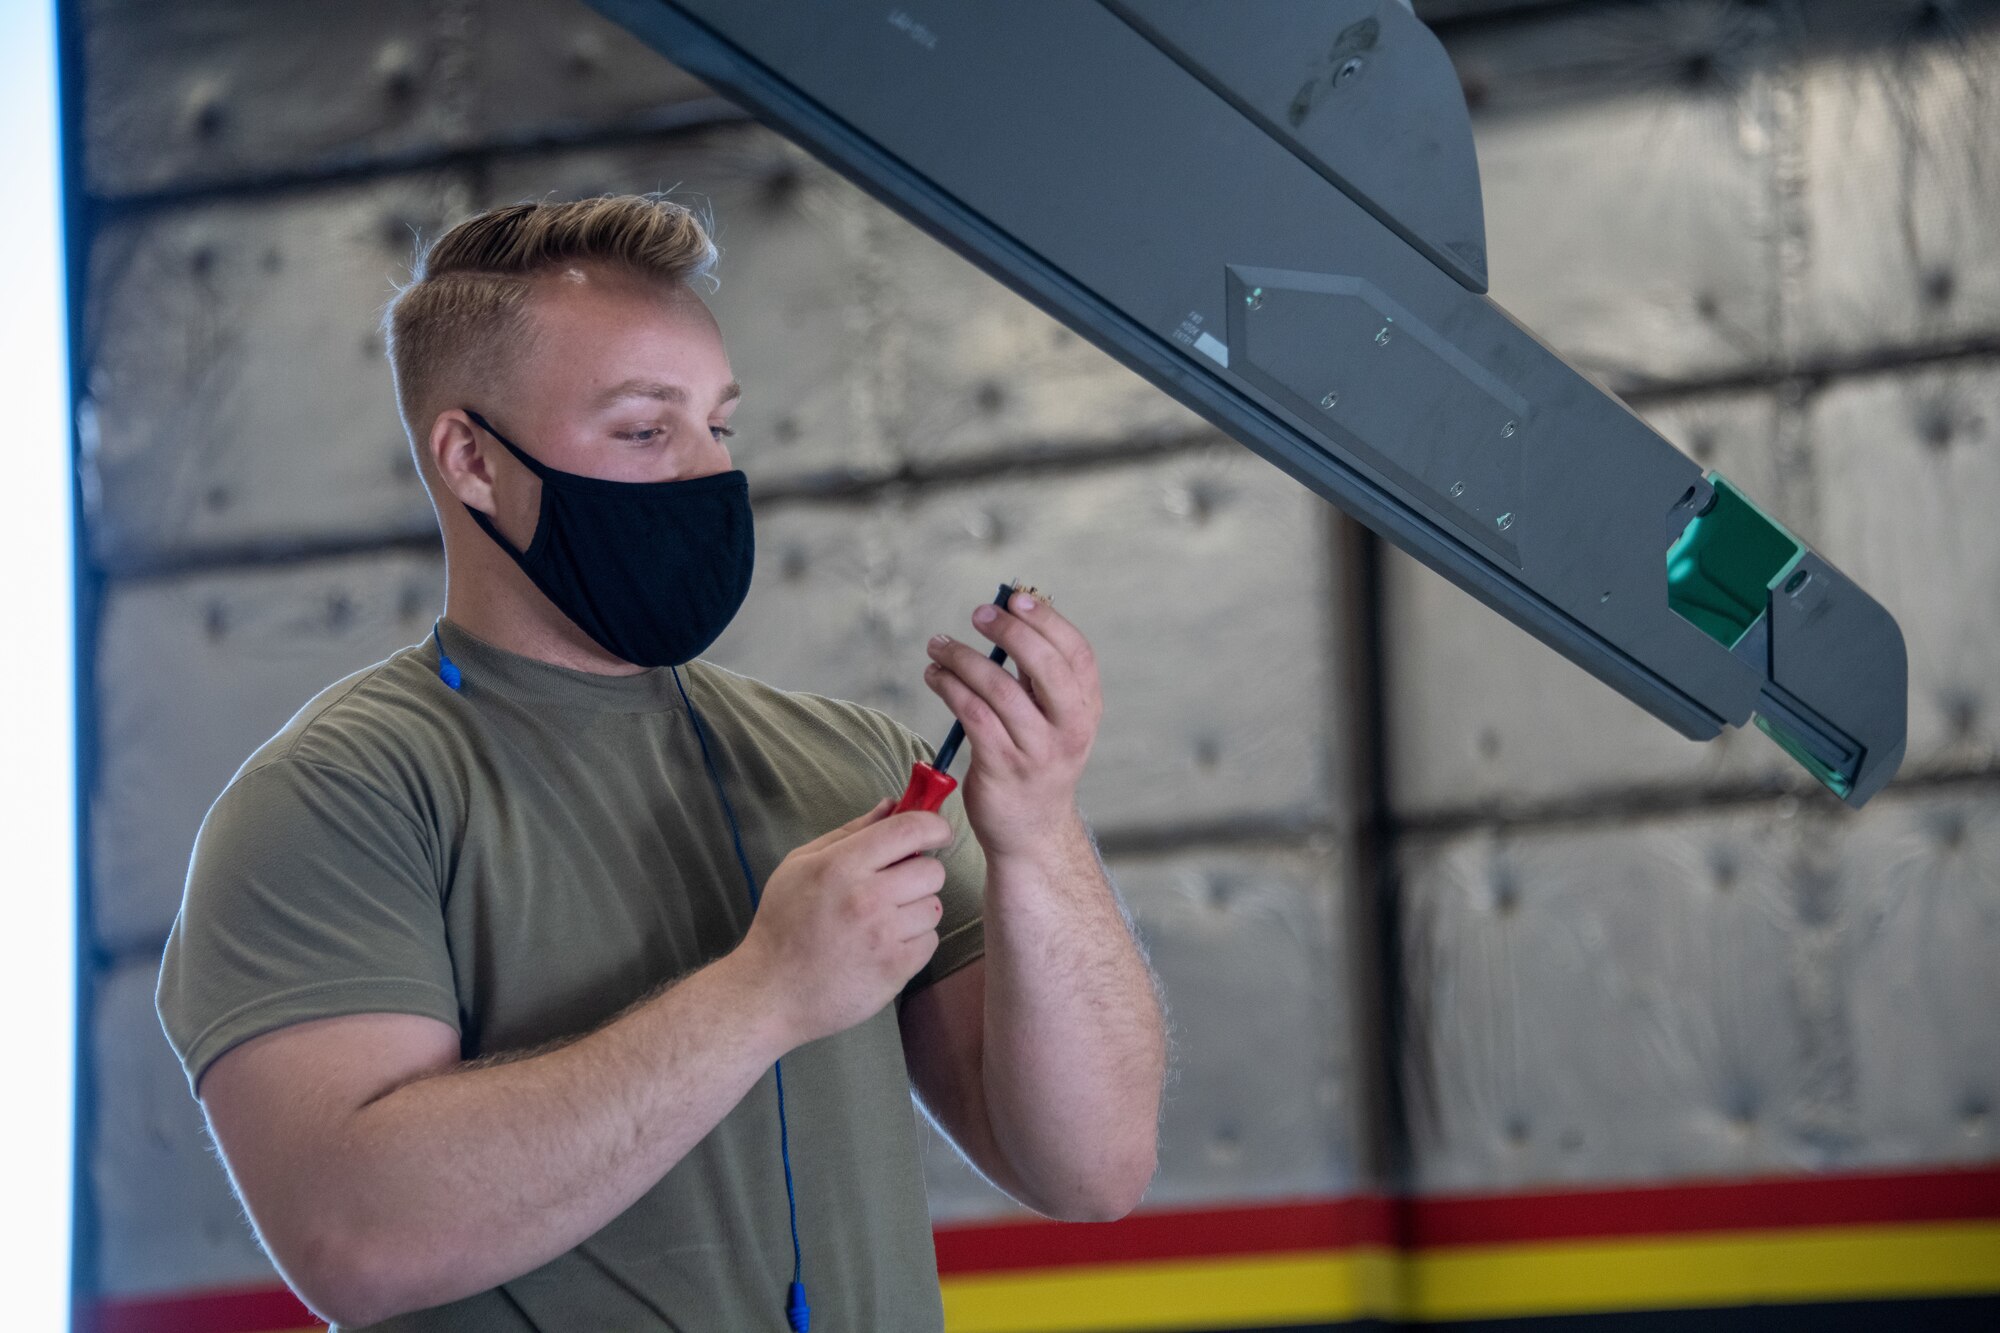 U.S. Air Force Senior Airman Seth Holden from the 419th Aircraft Maintenance Squadron prepares a pylon on an F-35A Lightning II during a weapons load competition at Hill Air Force Base, Utah on Sept. 24, 2021. The quarterly competition focuses on speed, accuracy, and safety, ensuring standard loading procedures and proficiency across the wings. (U.S. Air Force photo by Senior Airman Erica Webster)